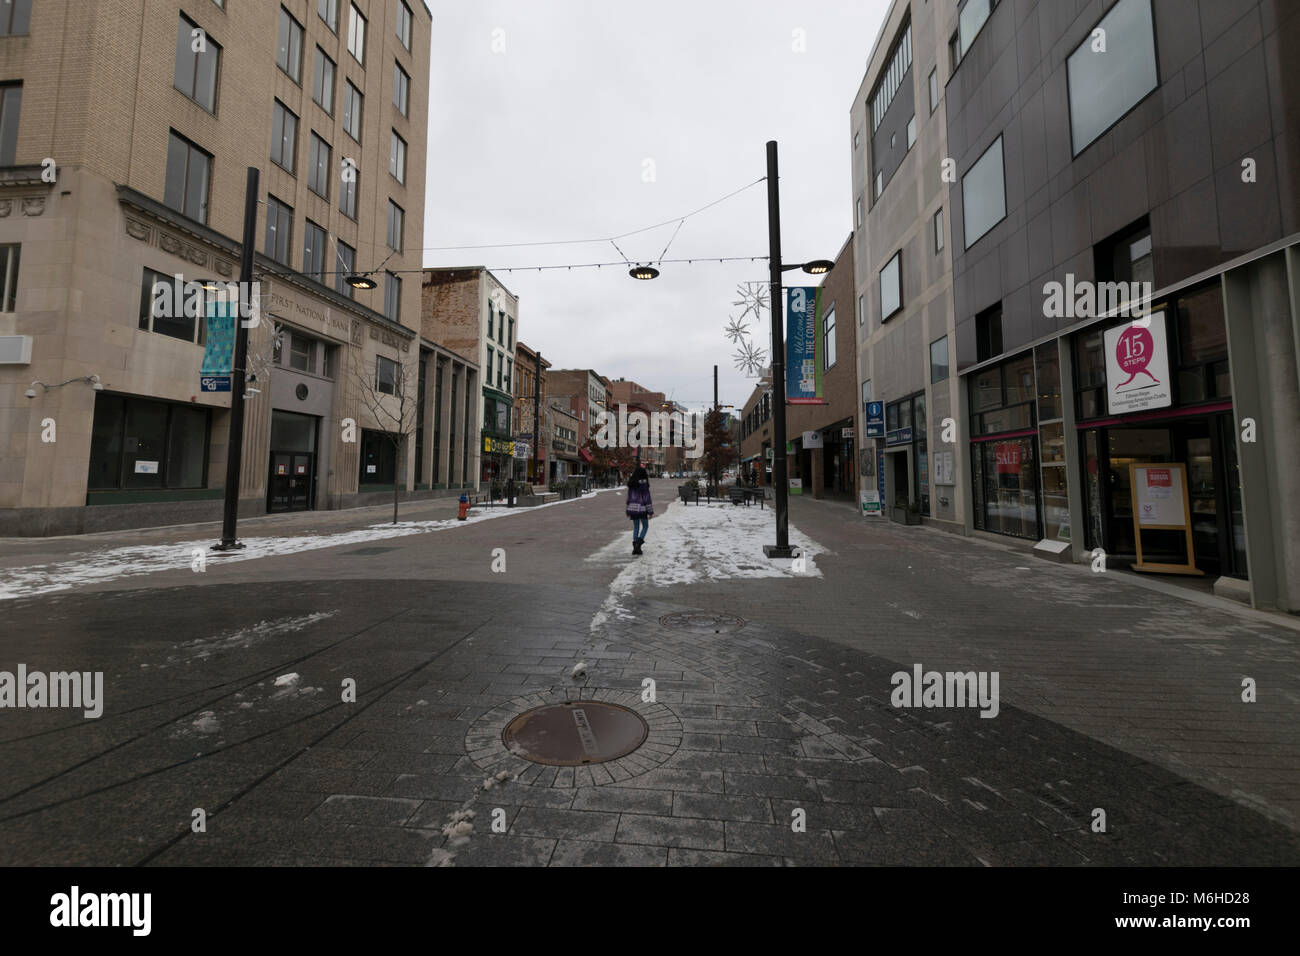 Downtown Ithaca Commons area, Ithaca NY Foto Stock